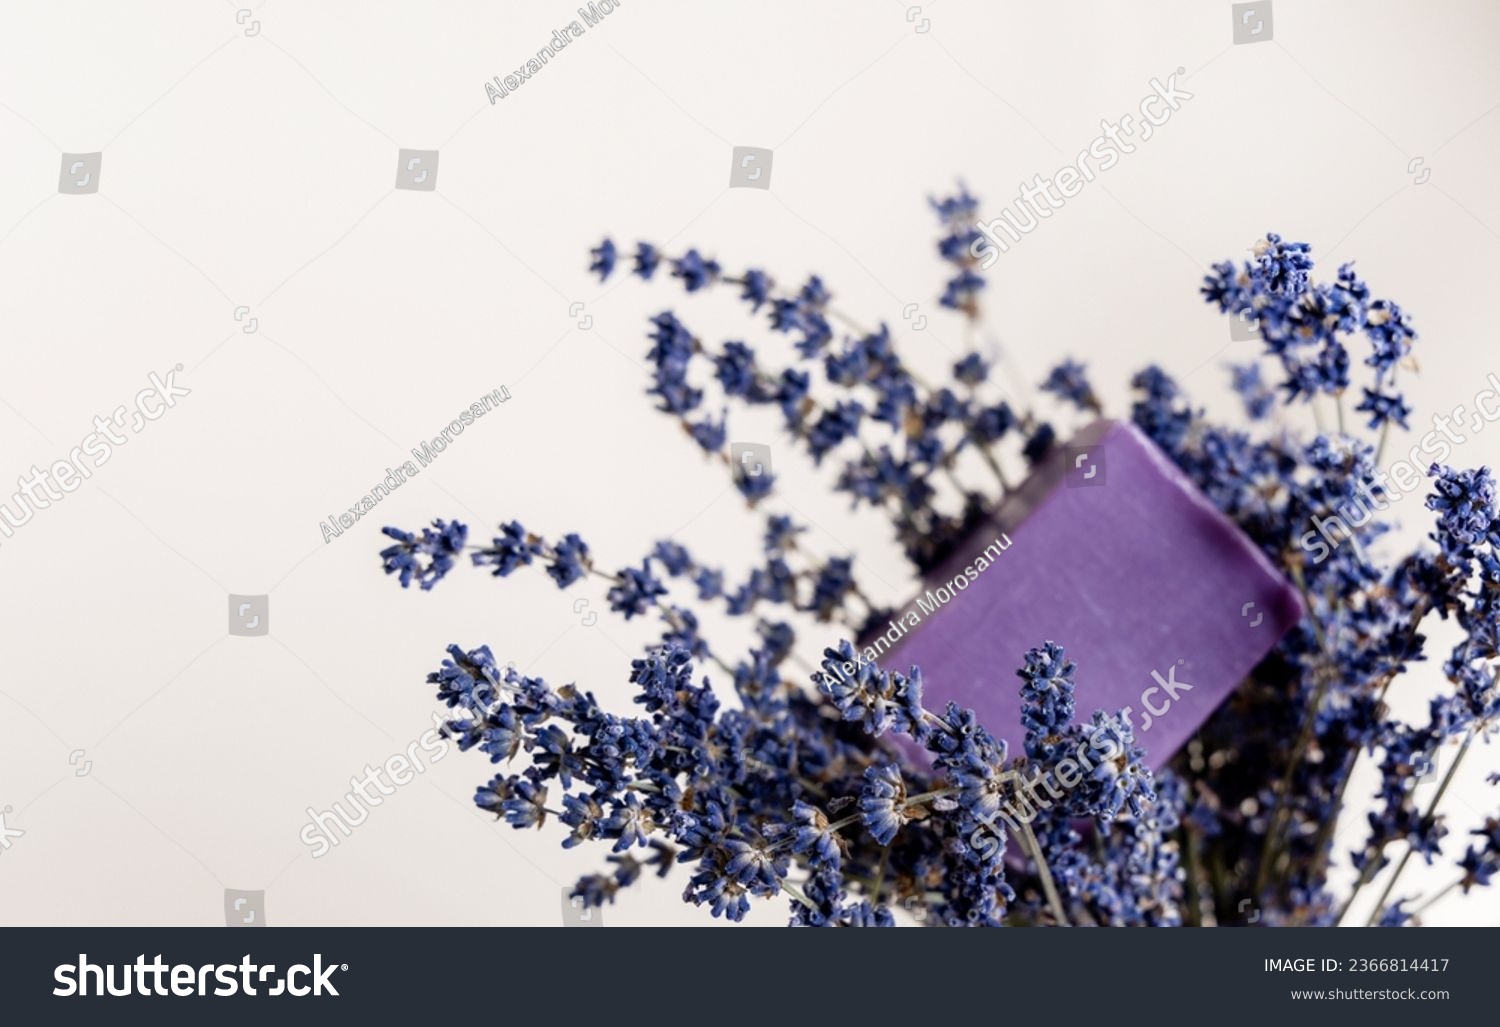 lavender handmade soap isolated on light background, on bed sheet with flowers and purple sack for sleeping improvement.soap on woman hand, woman holding bouquet.minimalist product photography. #2366814417